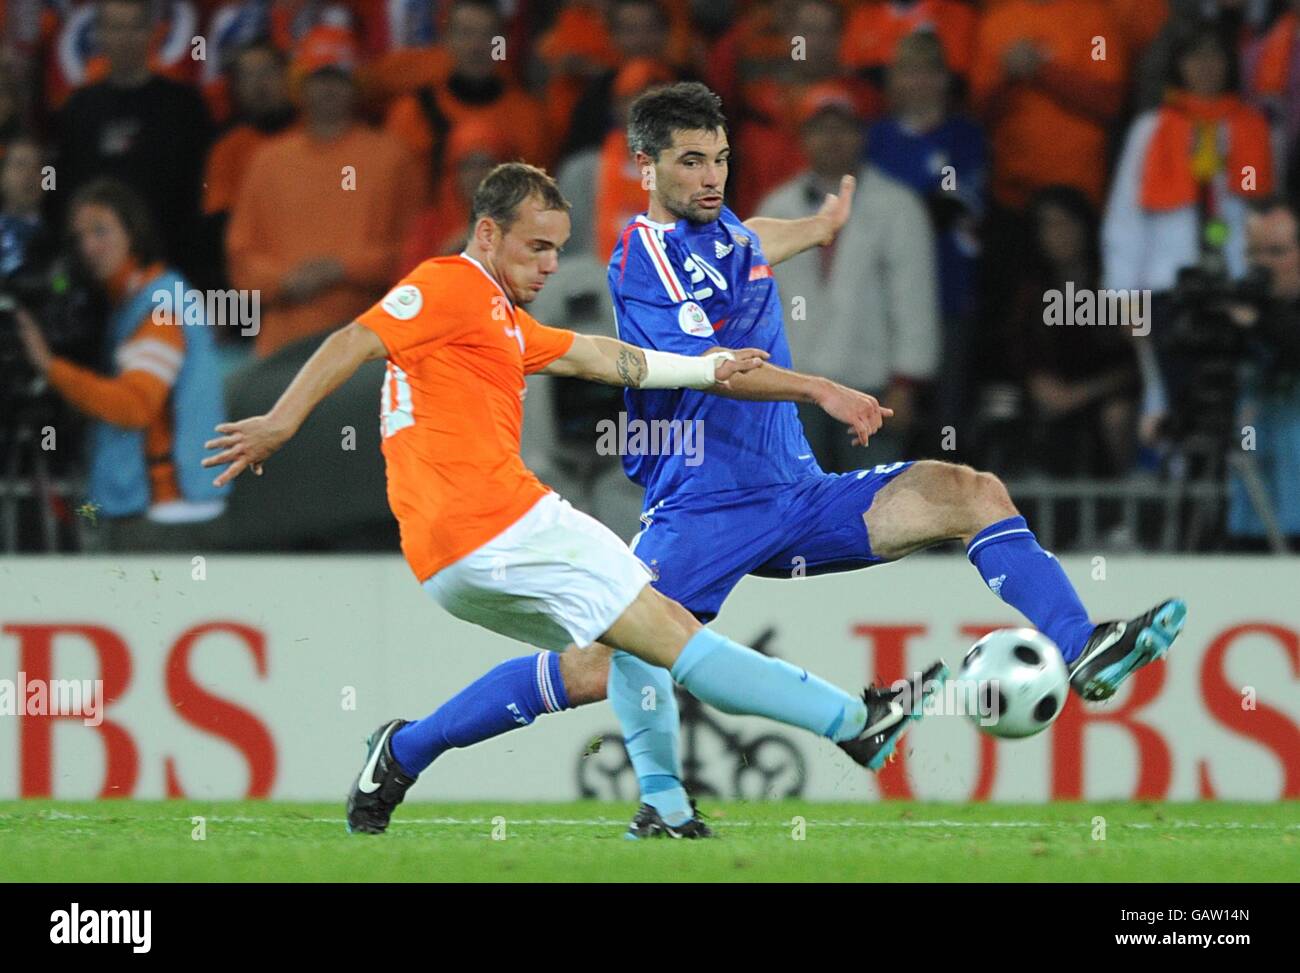 Soccer - UEFA European Championship 2008 - Group C - Holland v France - Stade de Suisse. Holland's Wesley Sneijder and France's Jeremy Toulalan battle for the ball Stock Photo